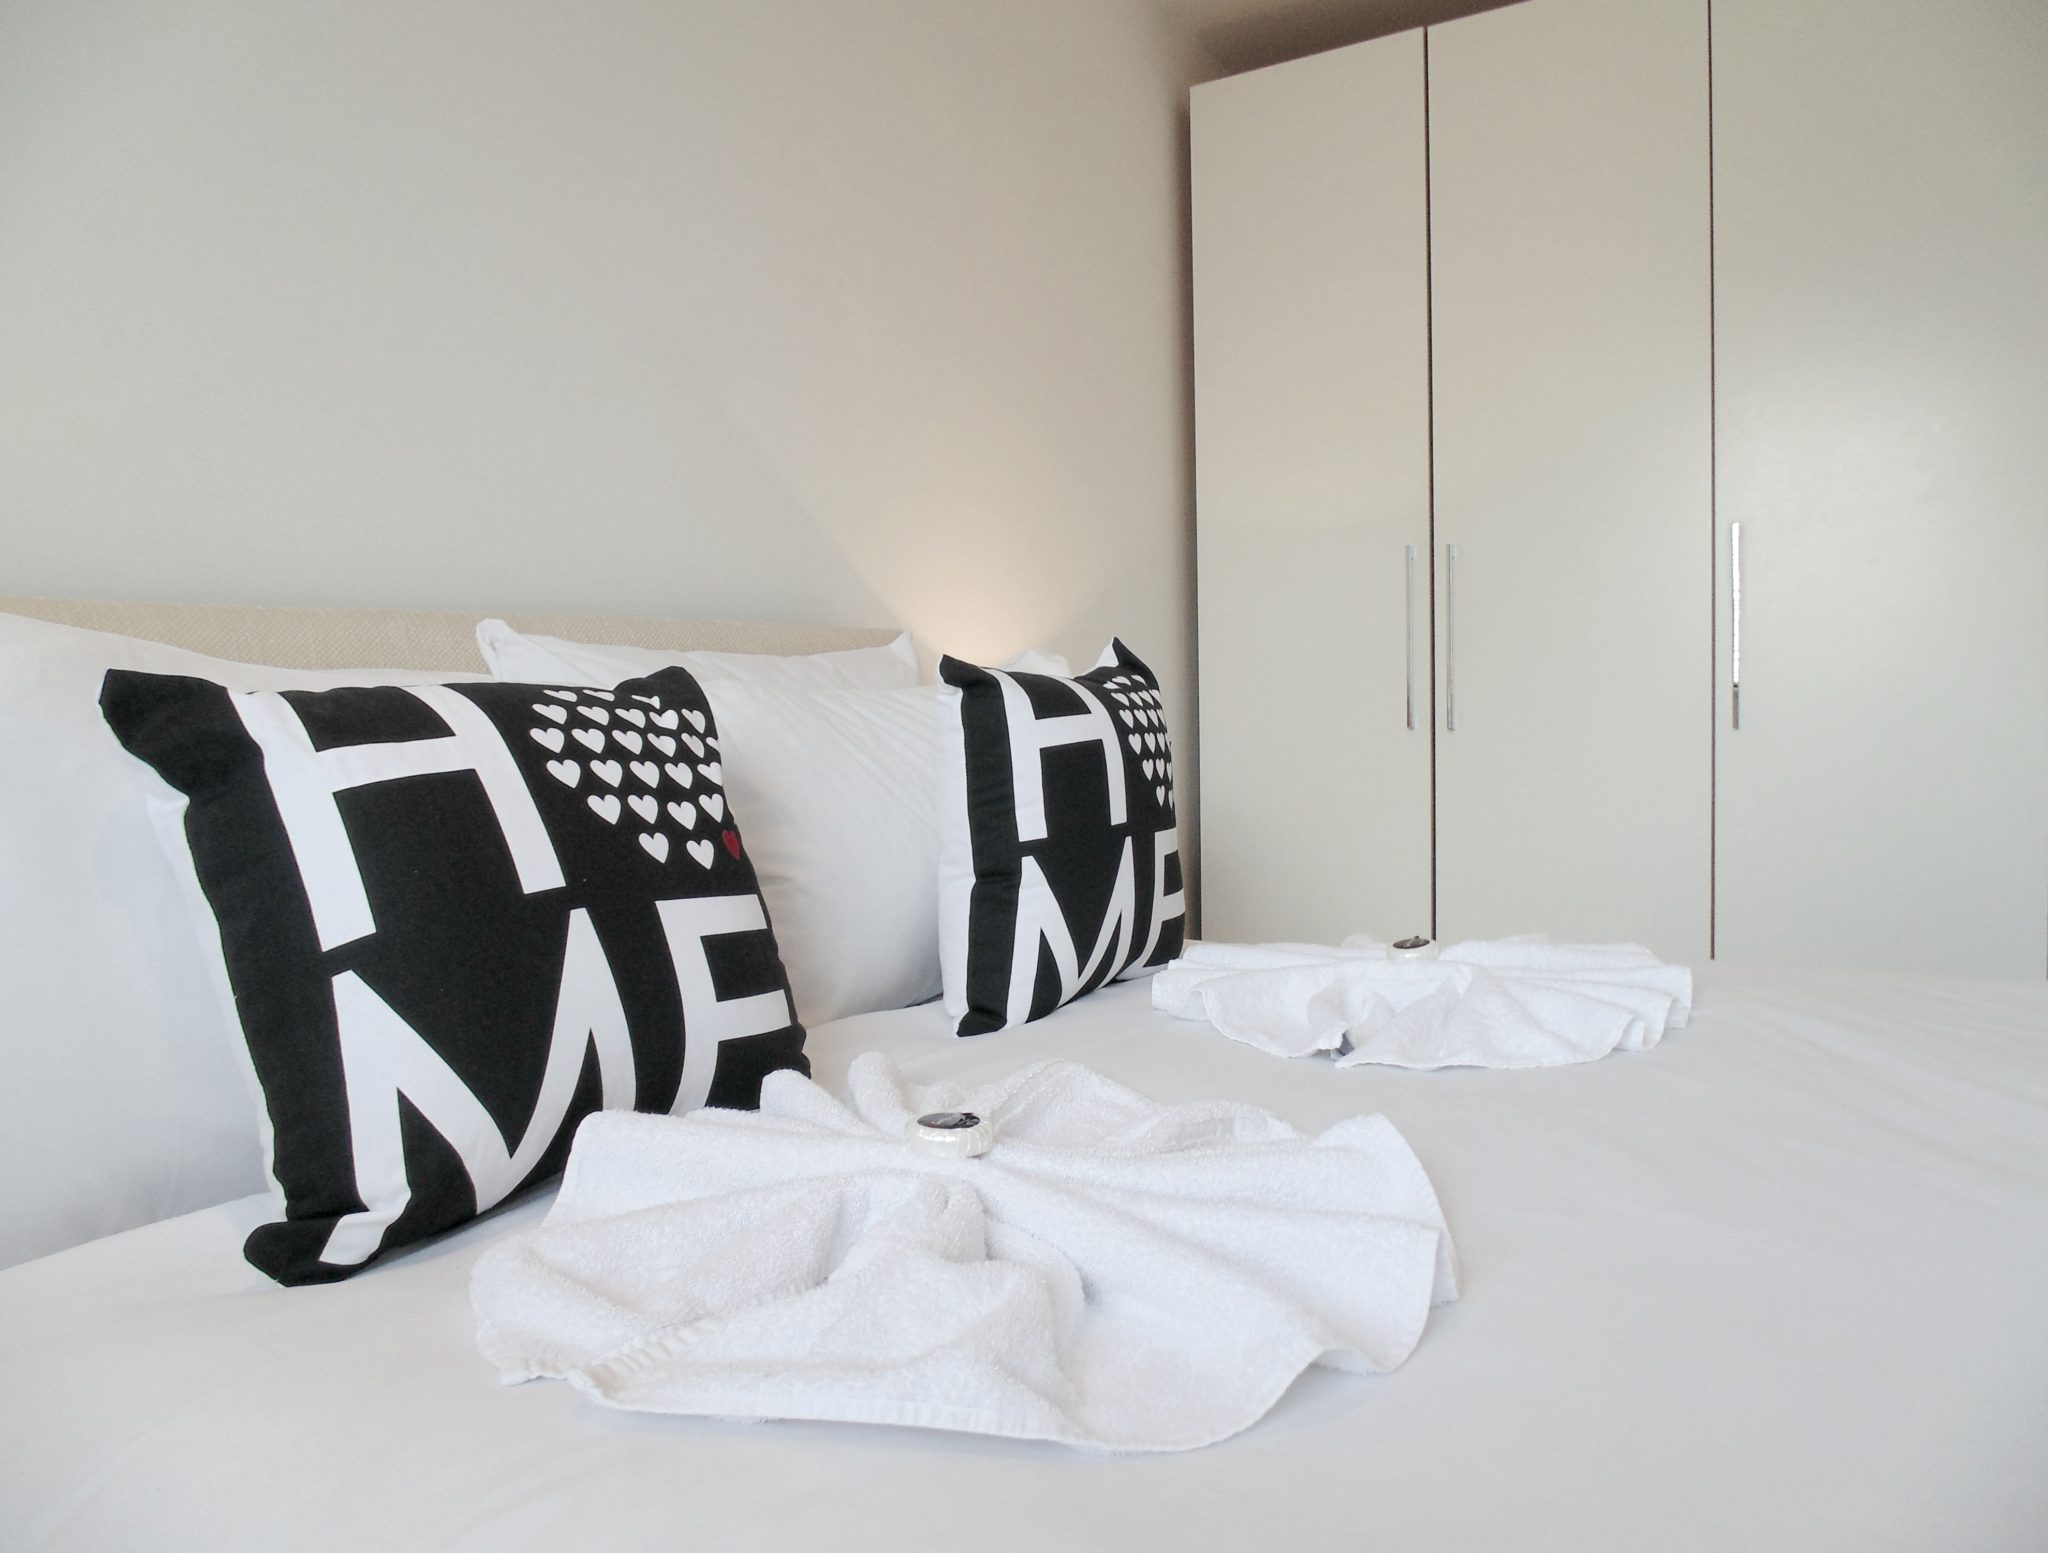 King’s Cross Serviced Apartments - Central London Serviced Apartments - London | Urban Stay